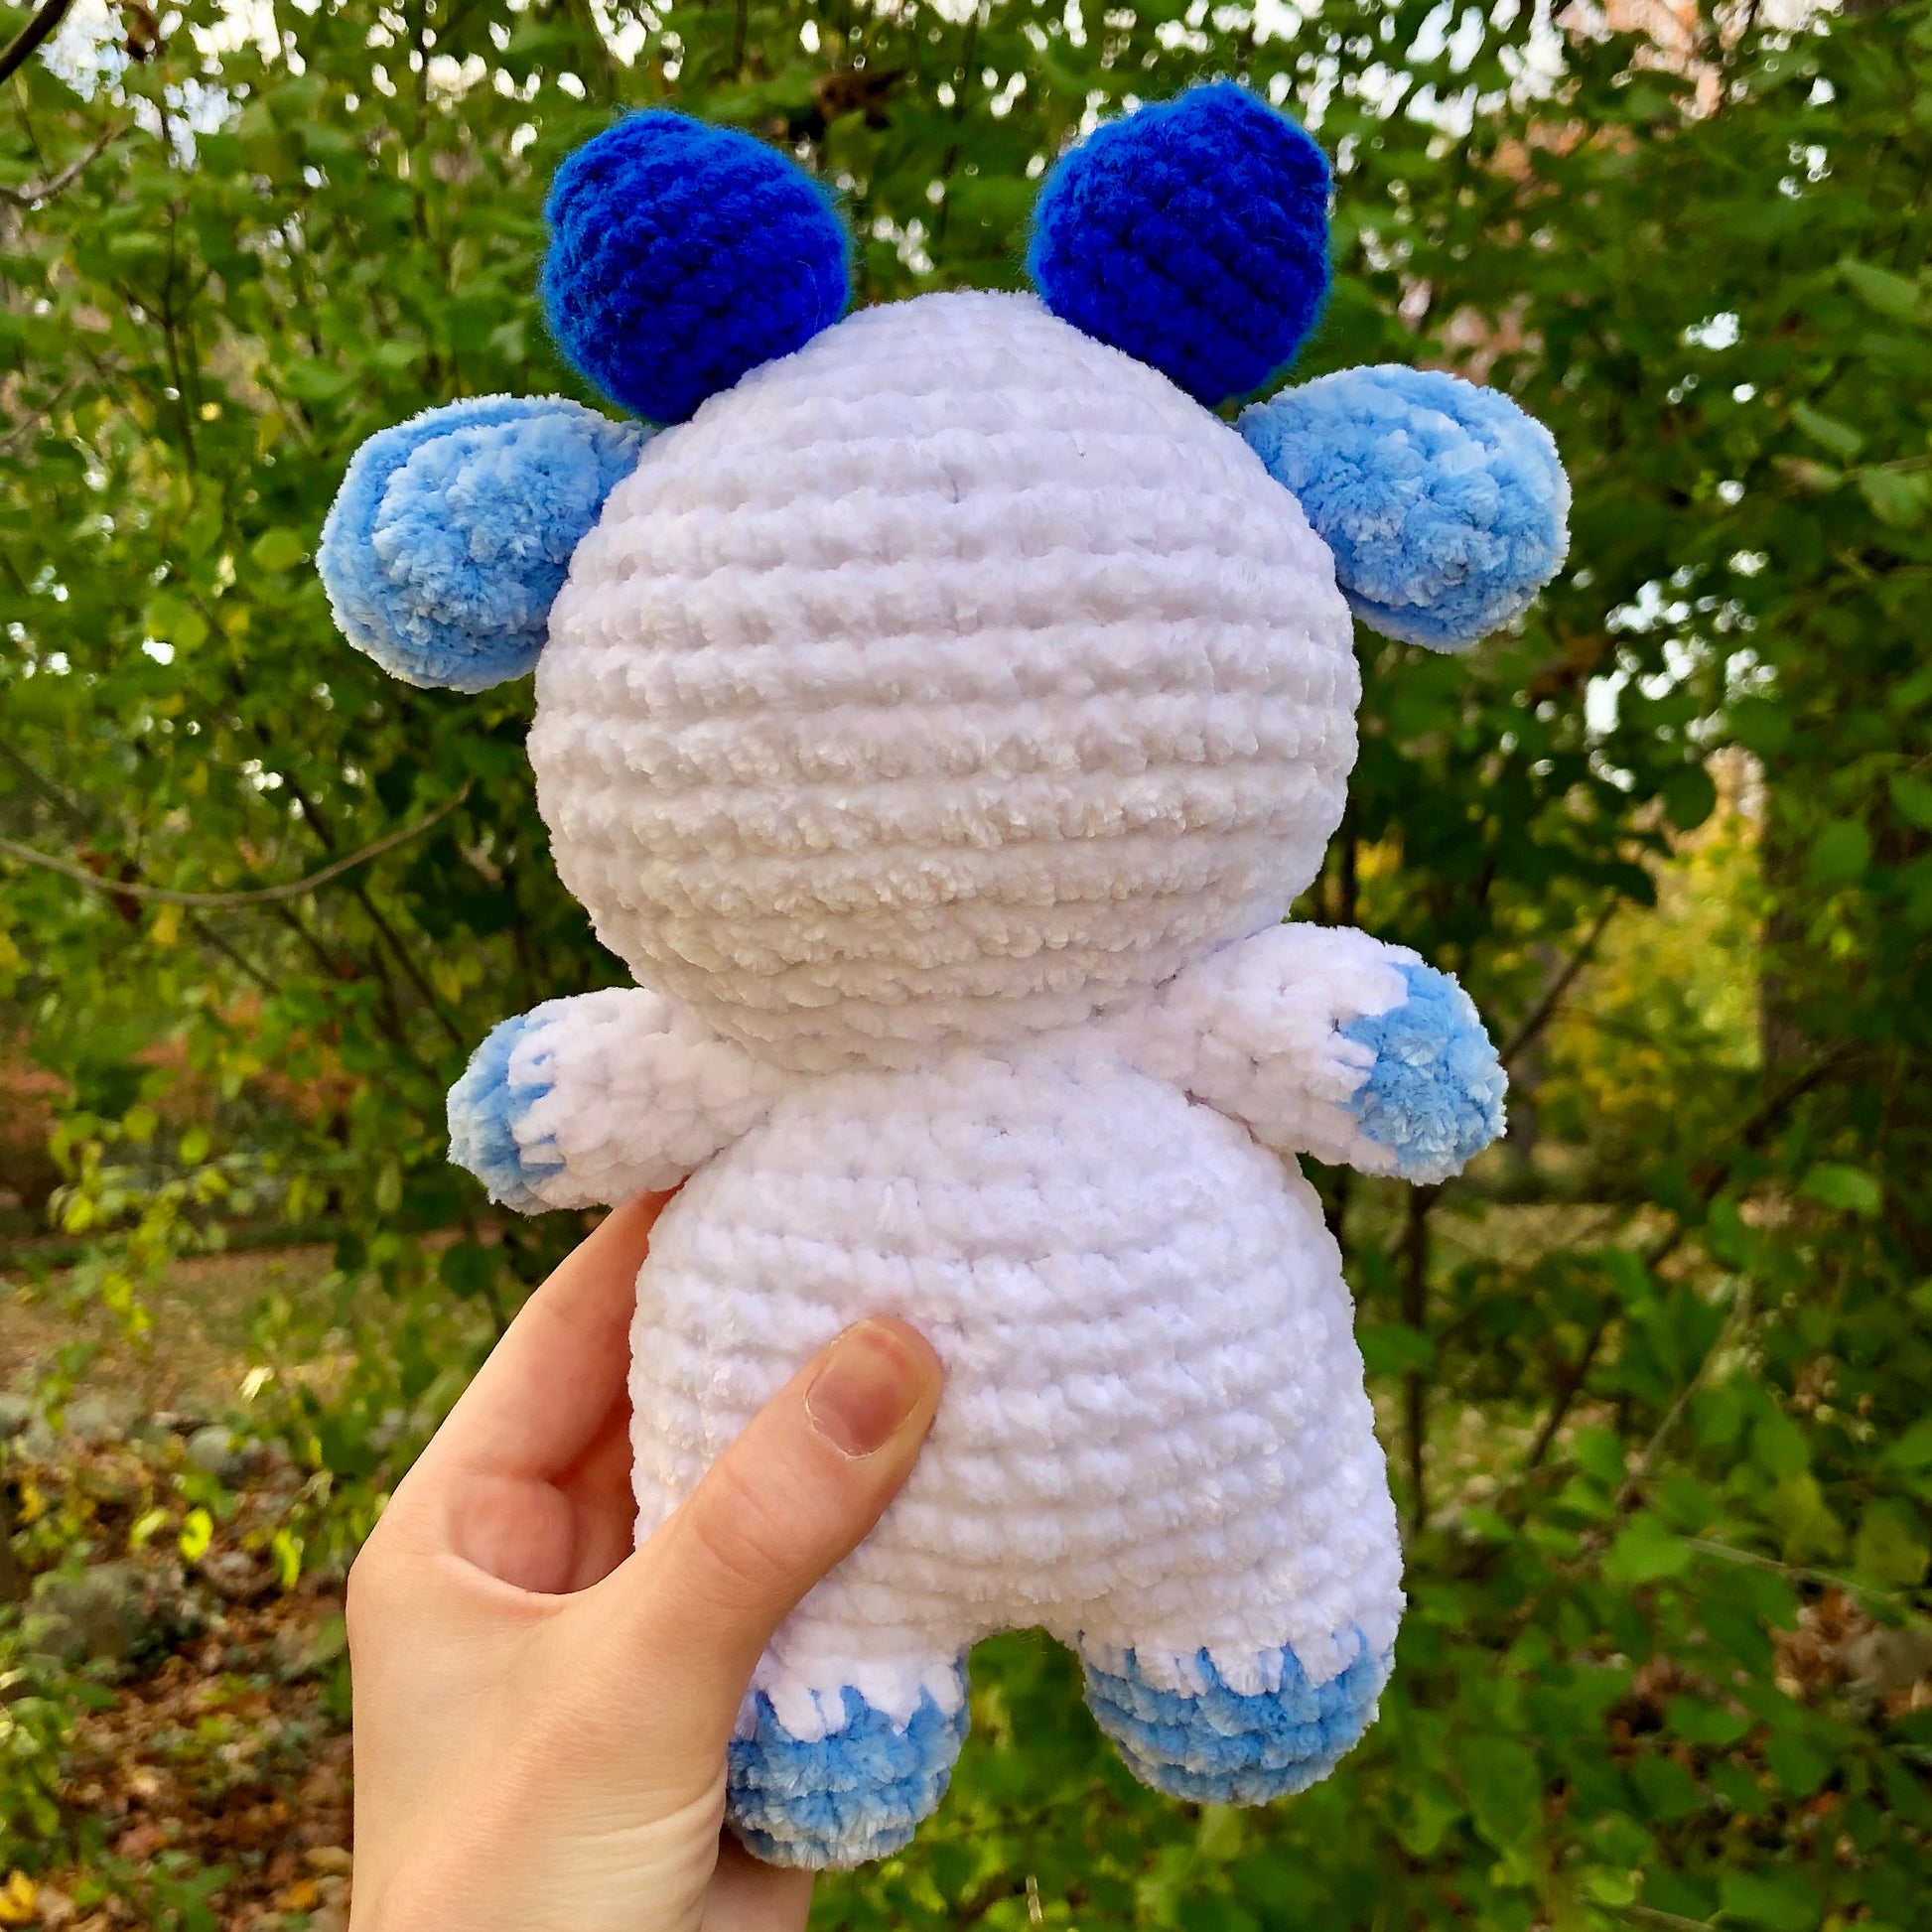 Still quite new to crocheting, but I've taken a big liking into crocheting  cute animals, plushies, etc… classed as Amigurumi. Yesterday I finished  making a blueberry themed cow, and I'm very proud!